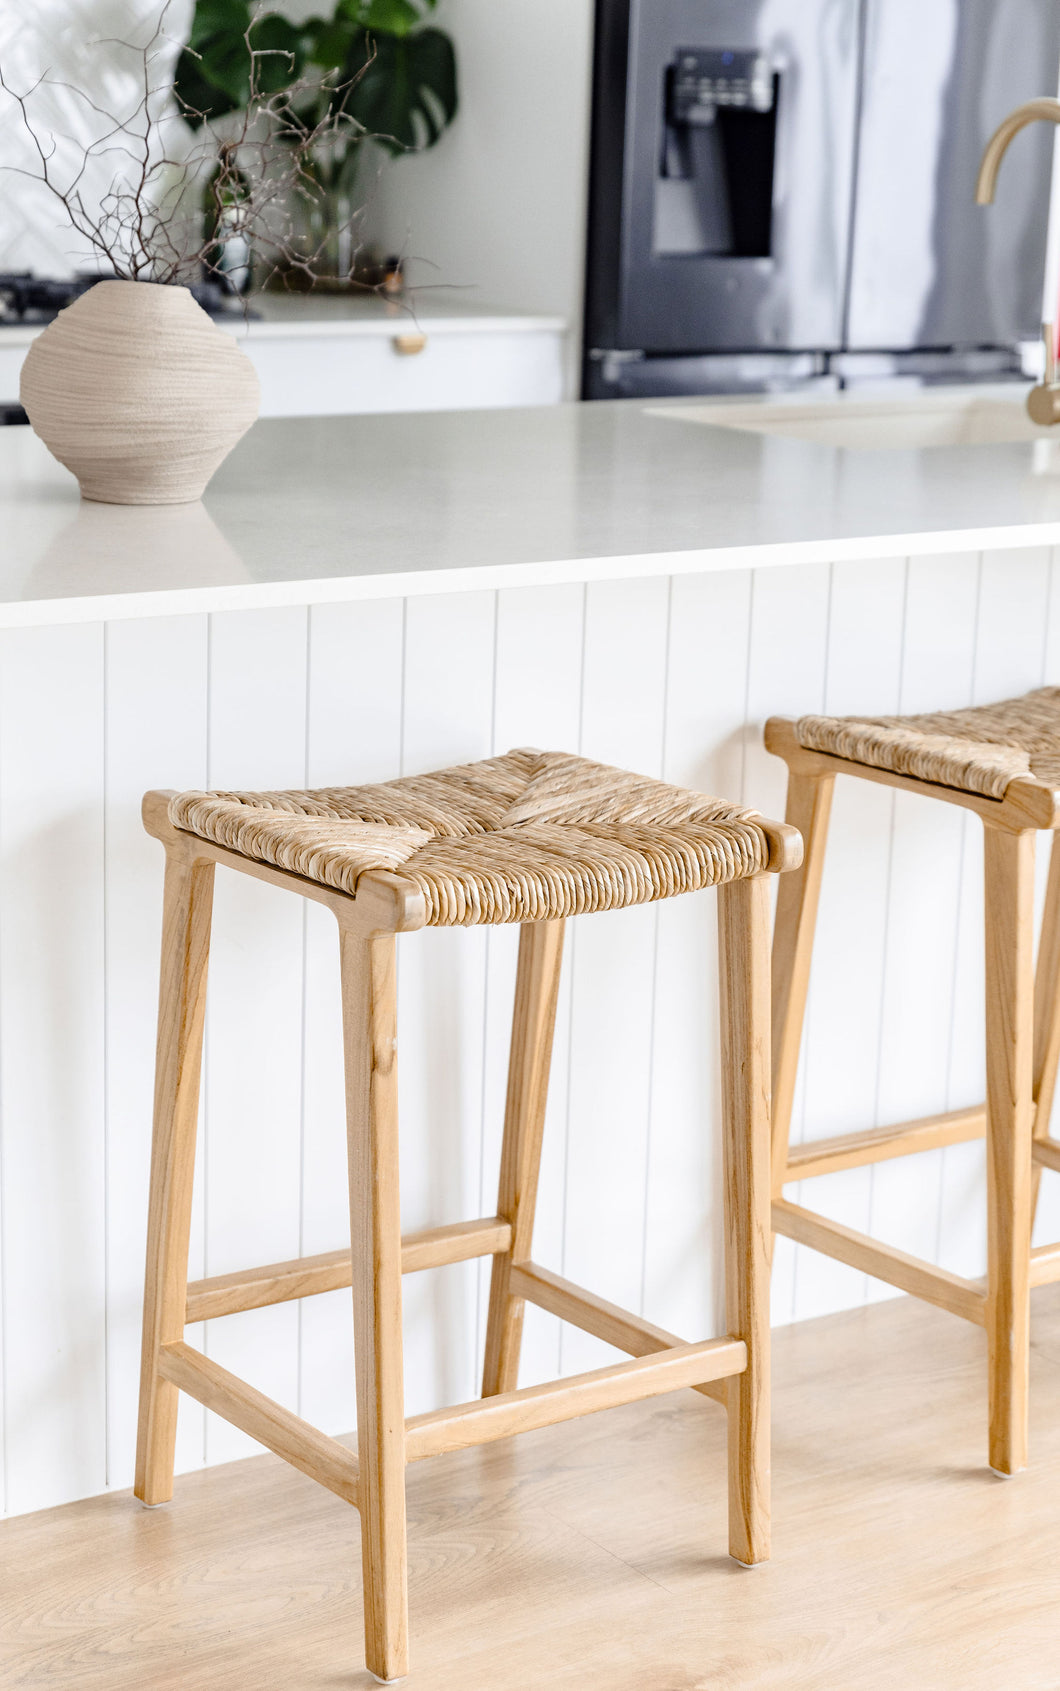 The Zeke counter stool (pre-order available April)